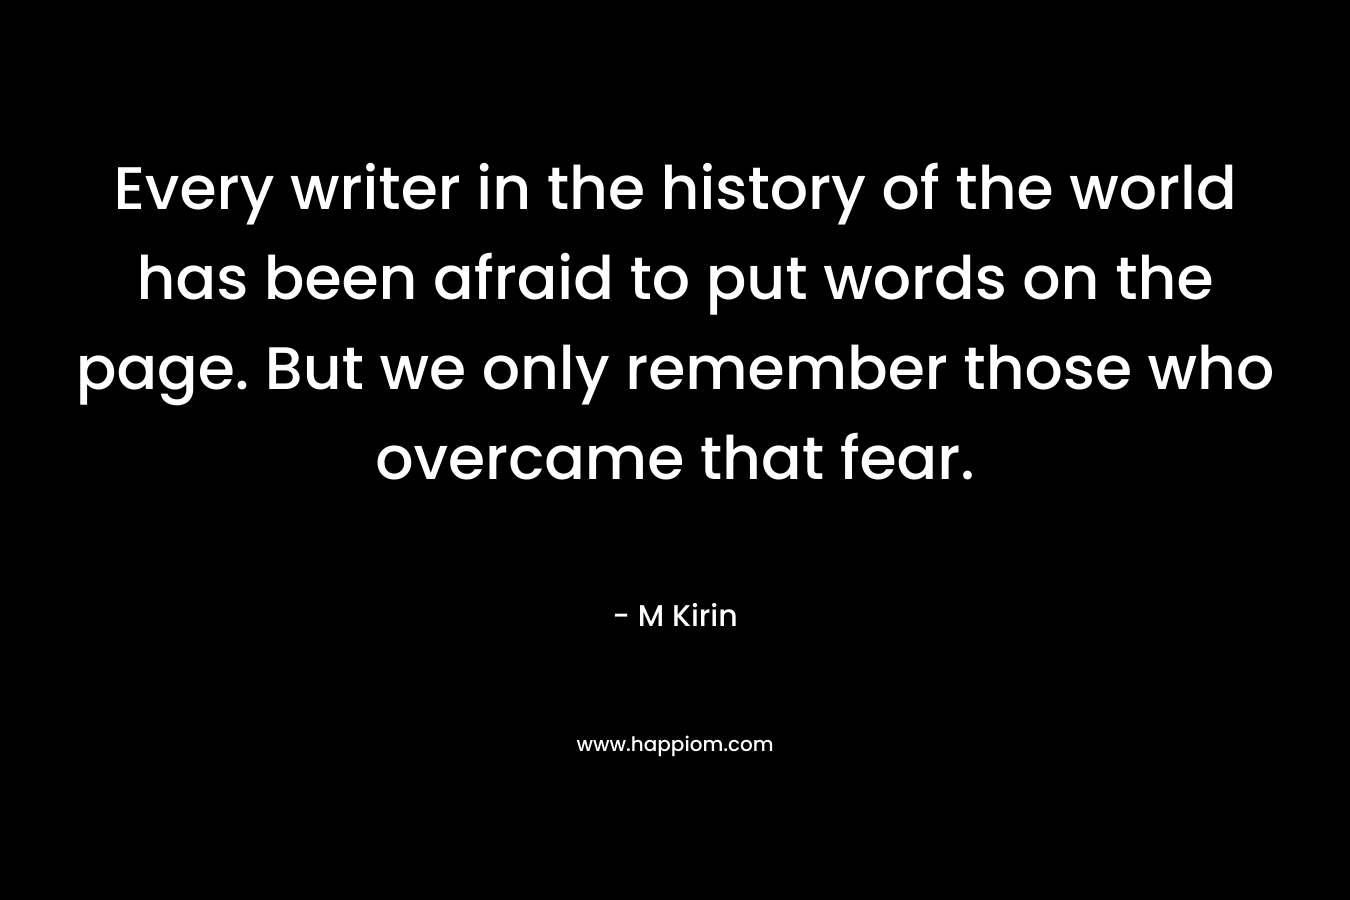 Every writer in the history of the world has been afraid to put words on the page. But we only remember those who overcame that fear. – M Kirin